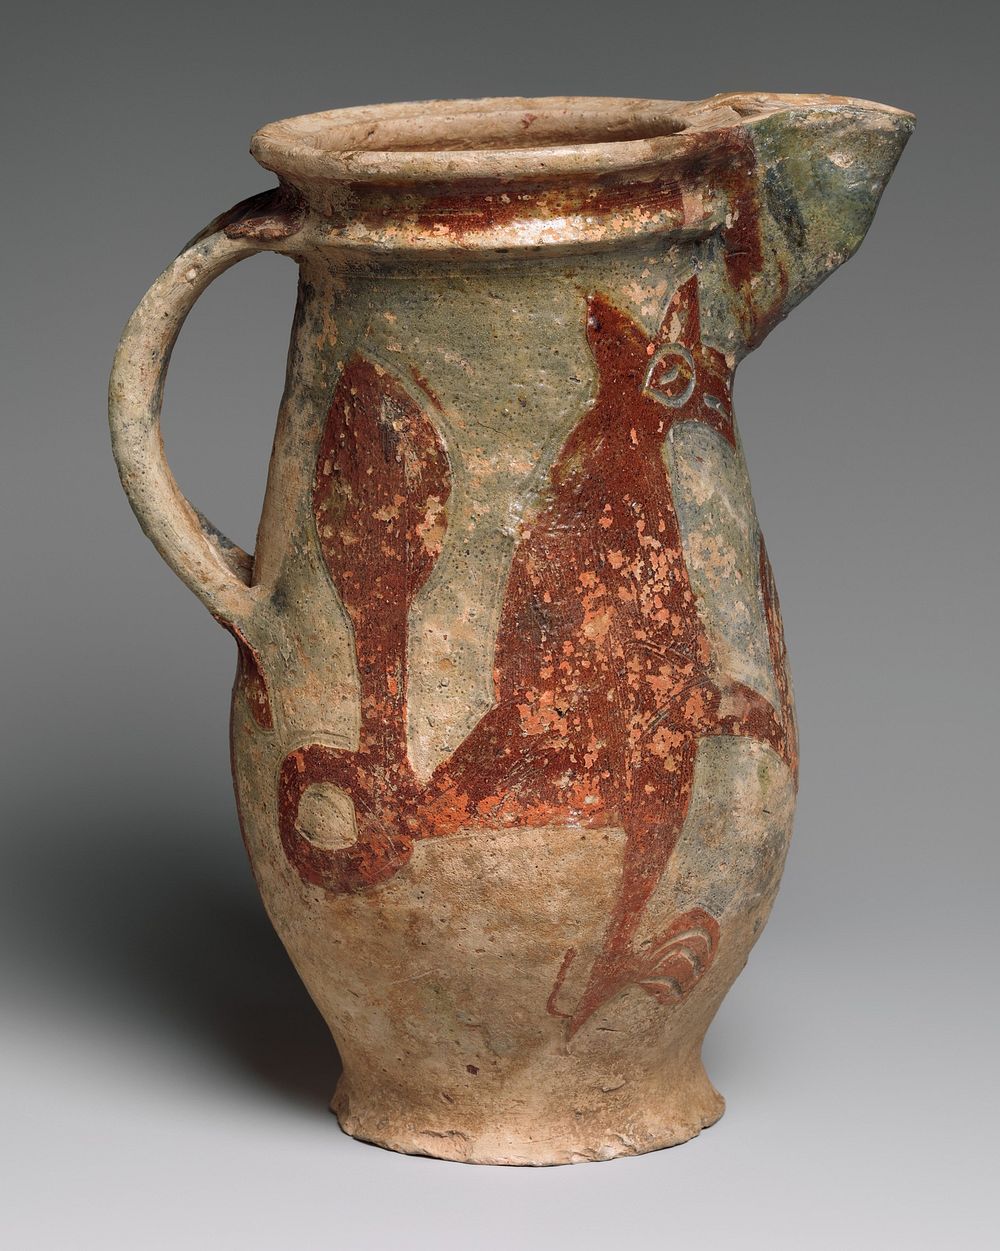 Barrel-Shaped Jug with a Fox and a Rooster